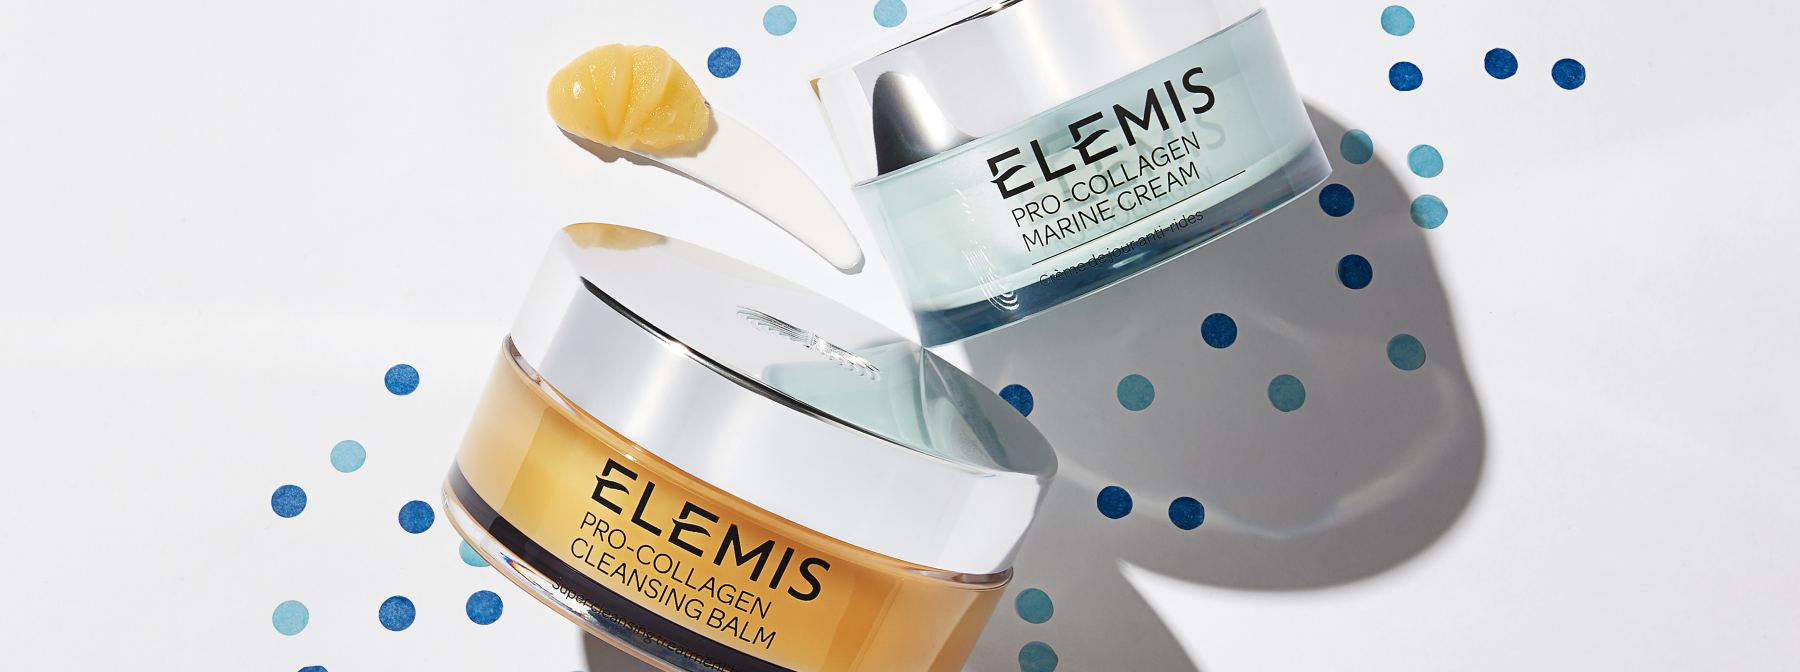 Elemis - Professional Beauty Products for Professional Salons and Spas